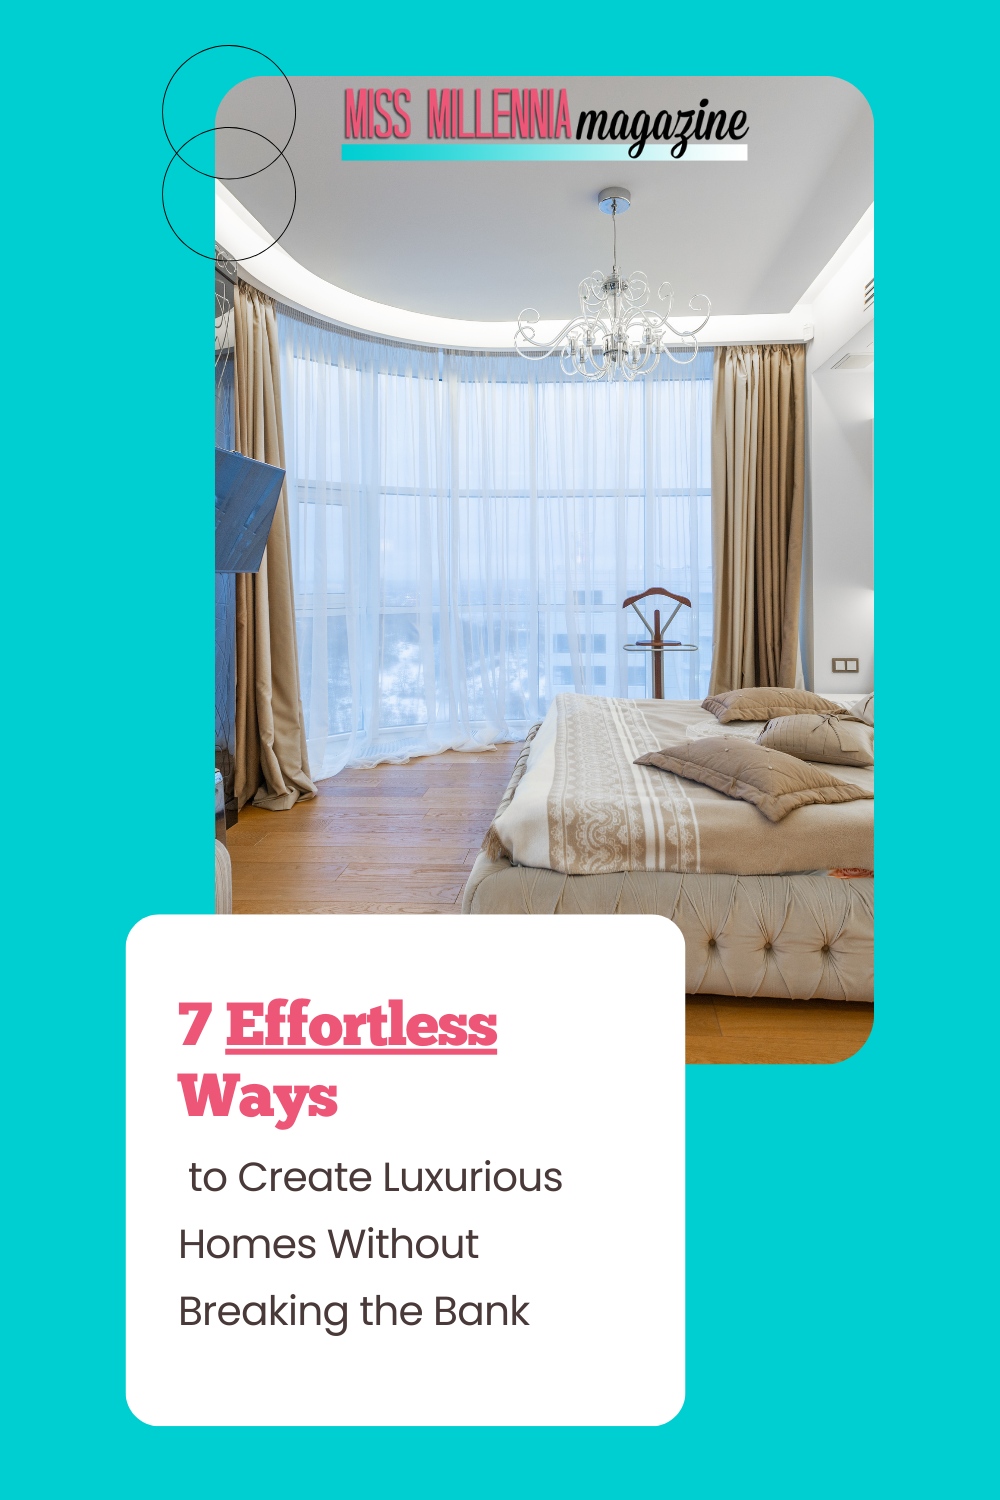 7 Effortless Ways to Create Luxurious Homes Without Breaking the Bank